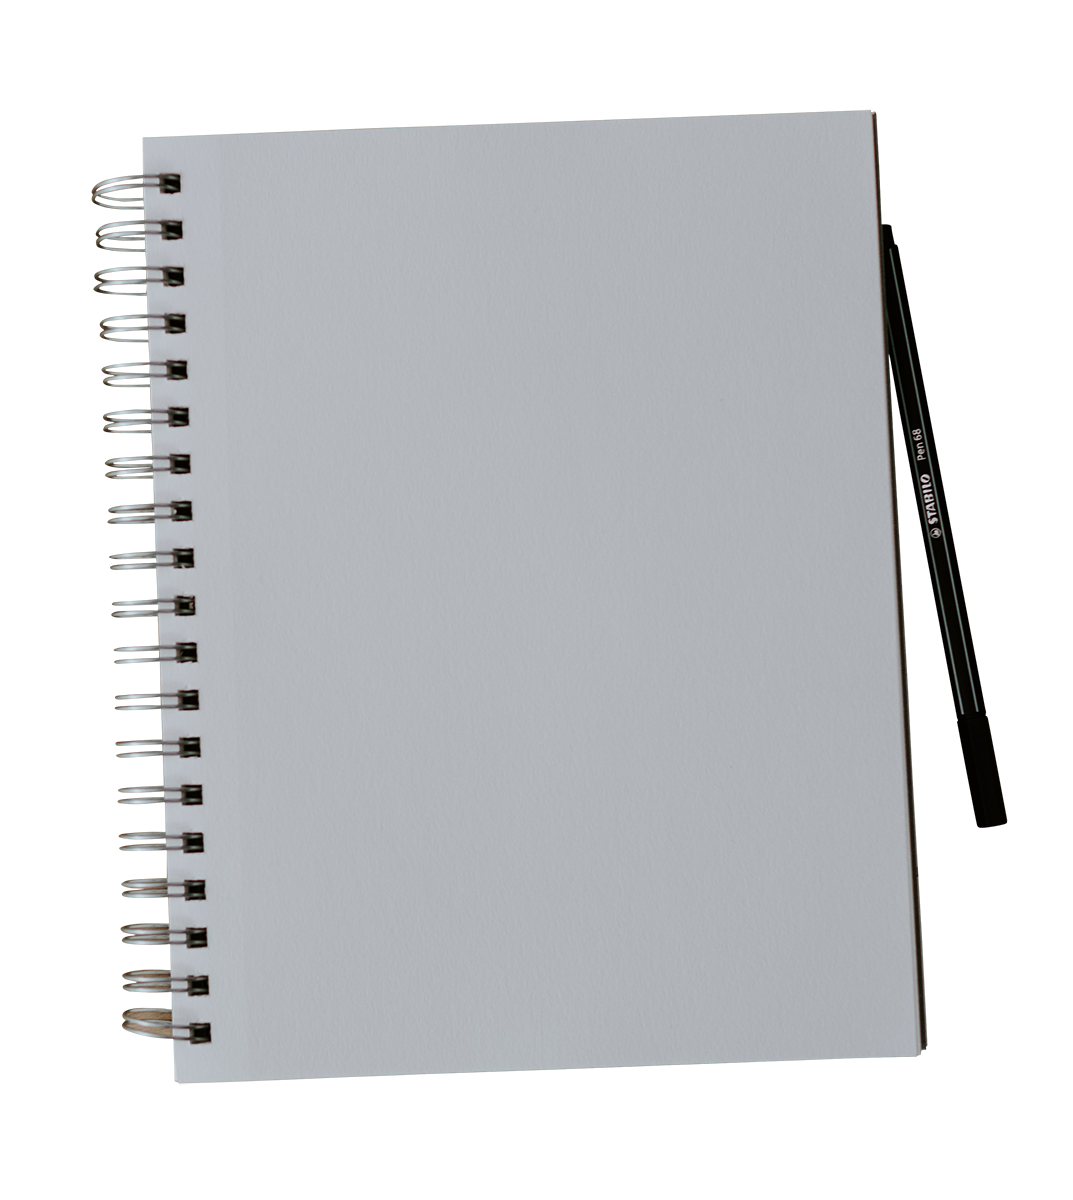 Spiral notebook and pen PNG image, transparent Spiral notebook and pen png, Spiral notebook and pen png hd images download